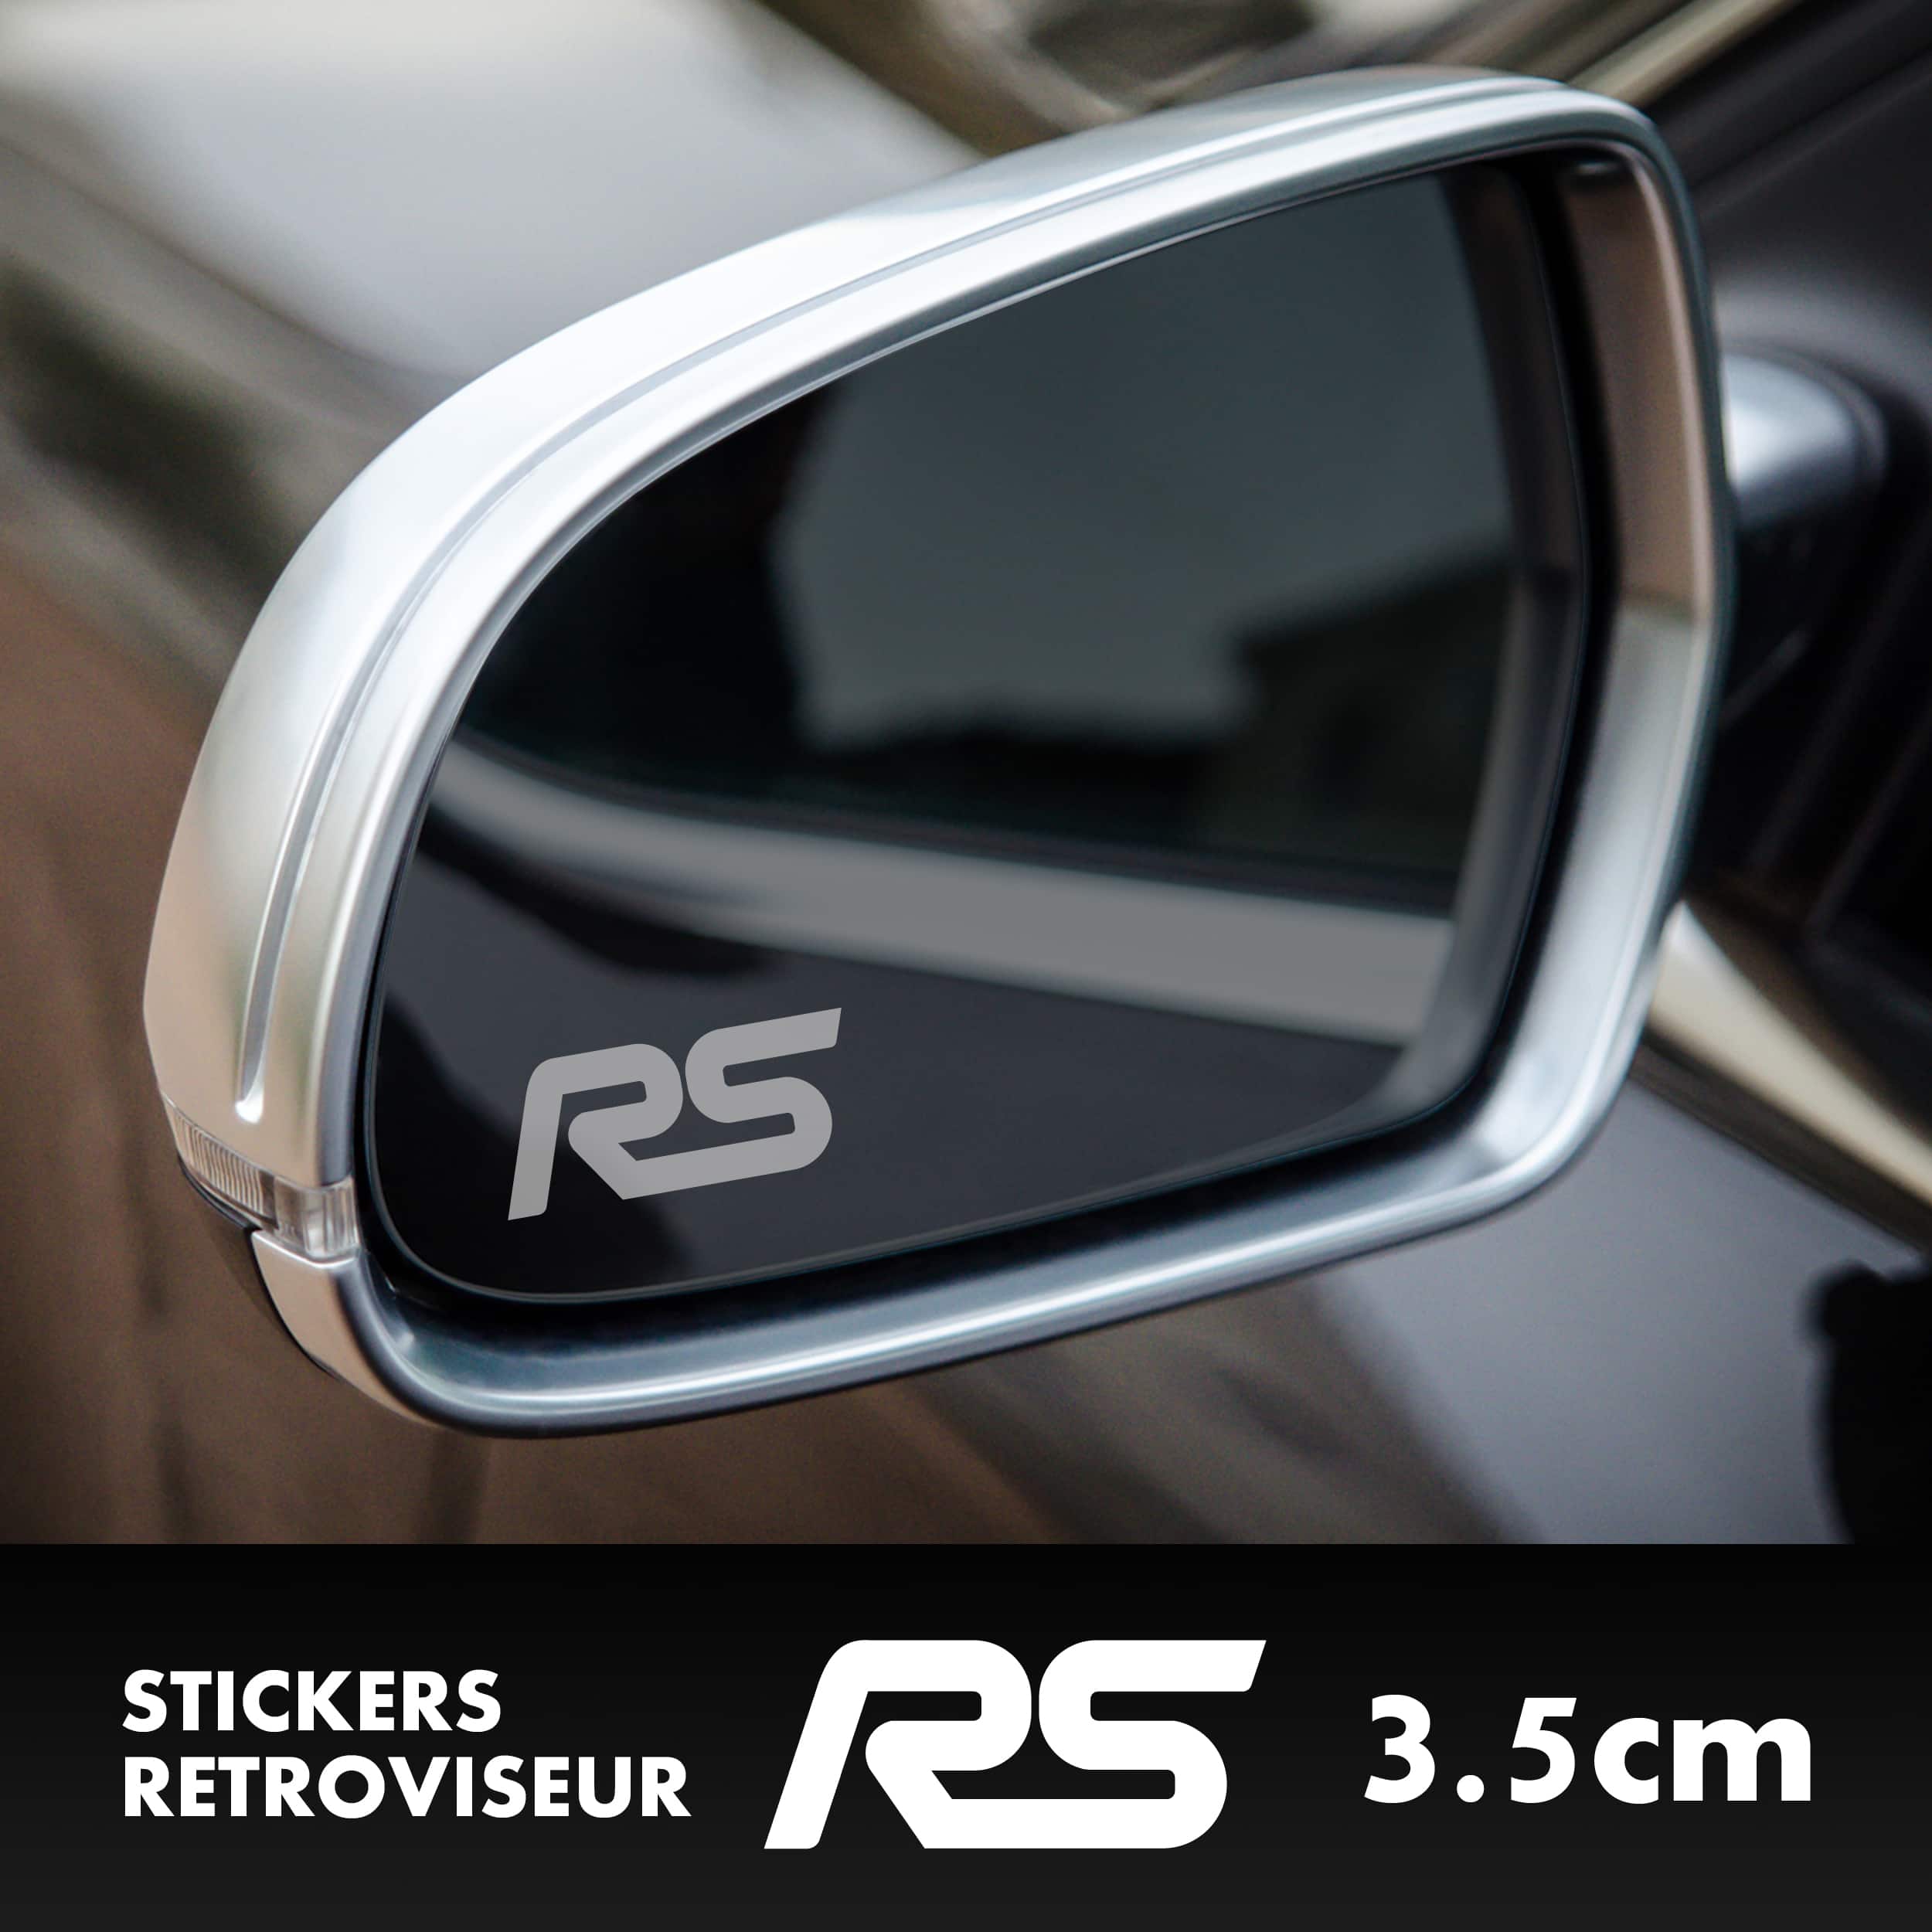 STICKERS RETROVISEUR FORD RS